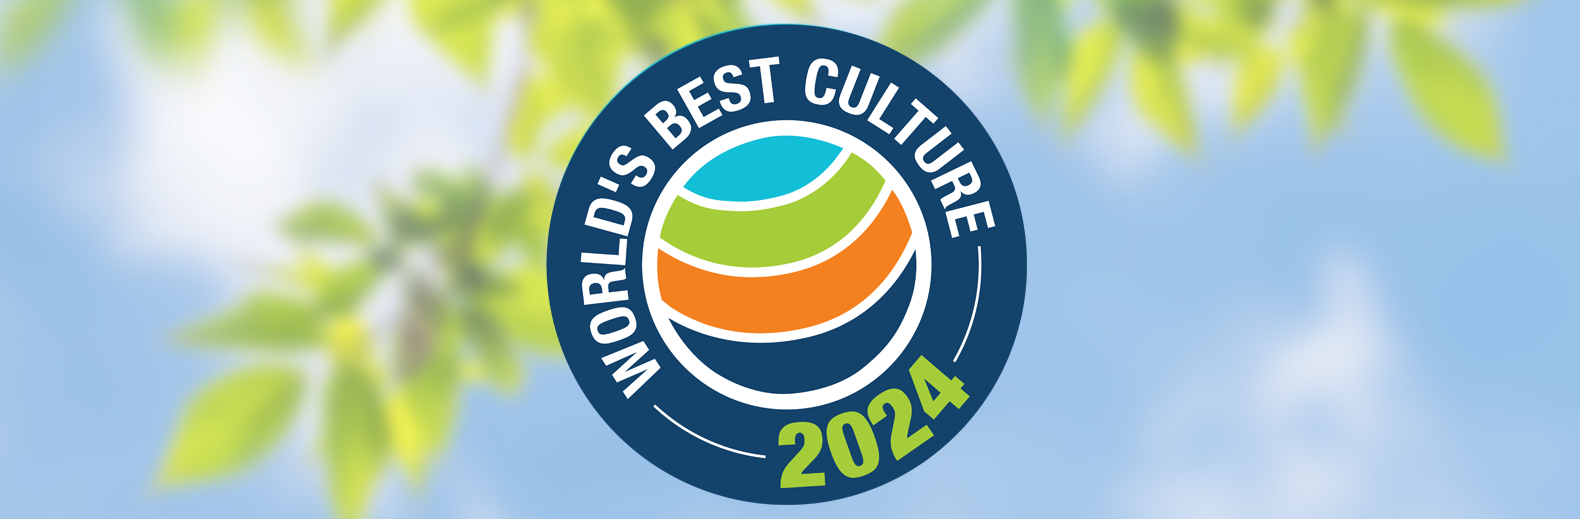 World's Best Culture 2024 Blog Featured Image